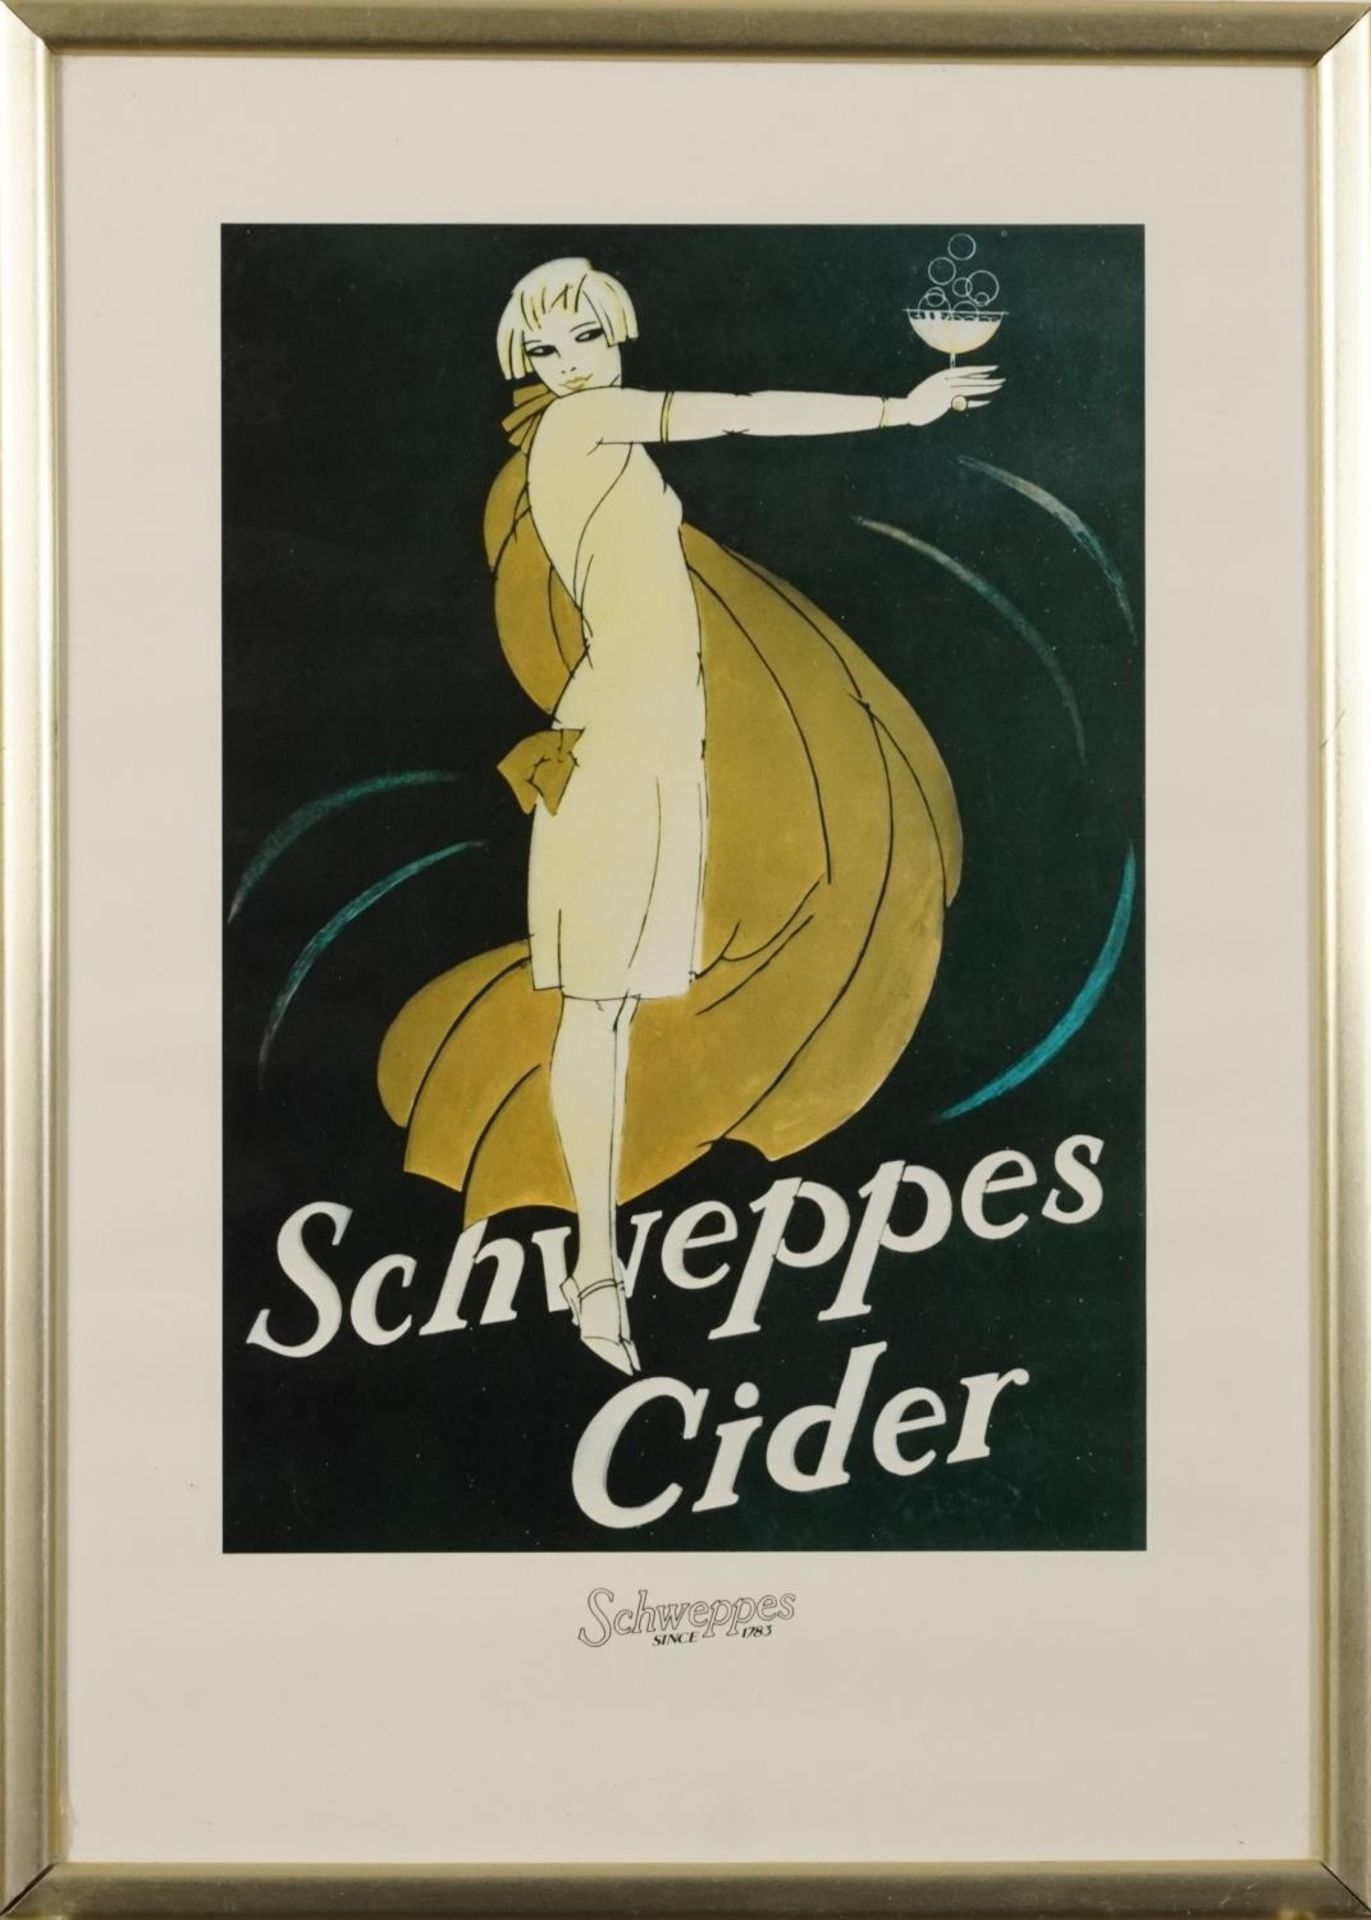 Schweppes, Cider, Tonic Water, Ginger Ale and Lemon Squash, set of six posters, framed and glazed, - Image 7 of 20